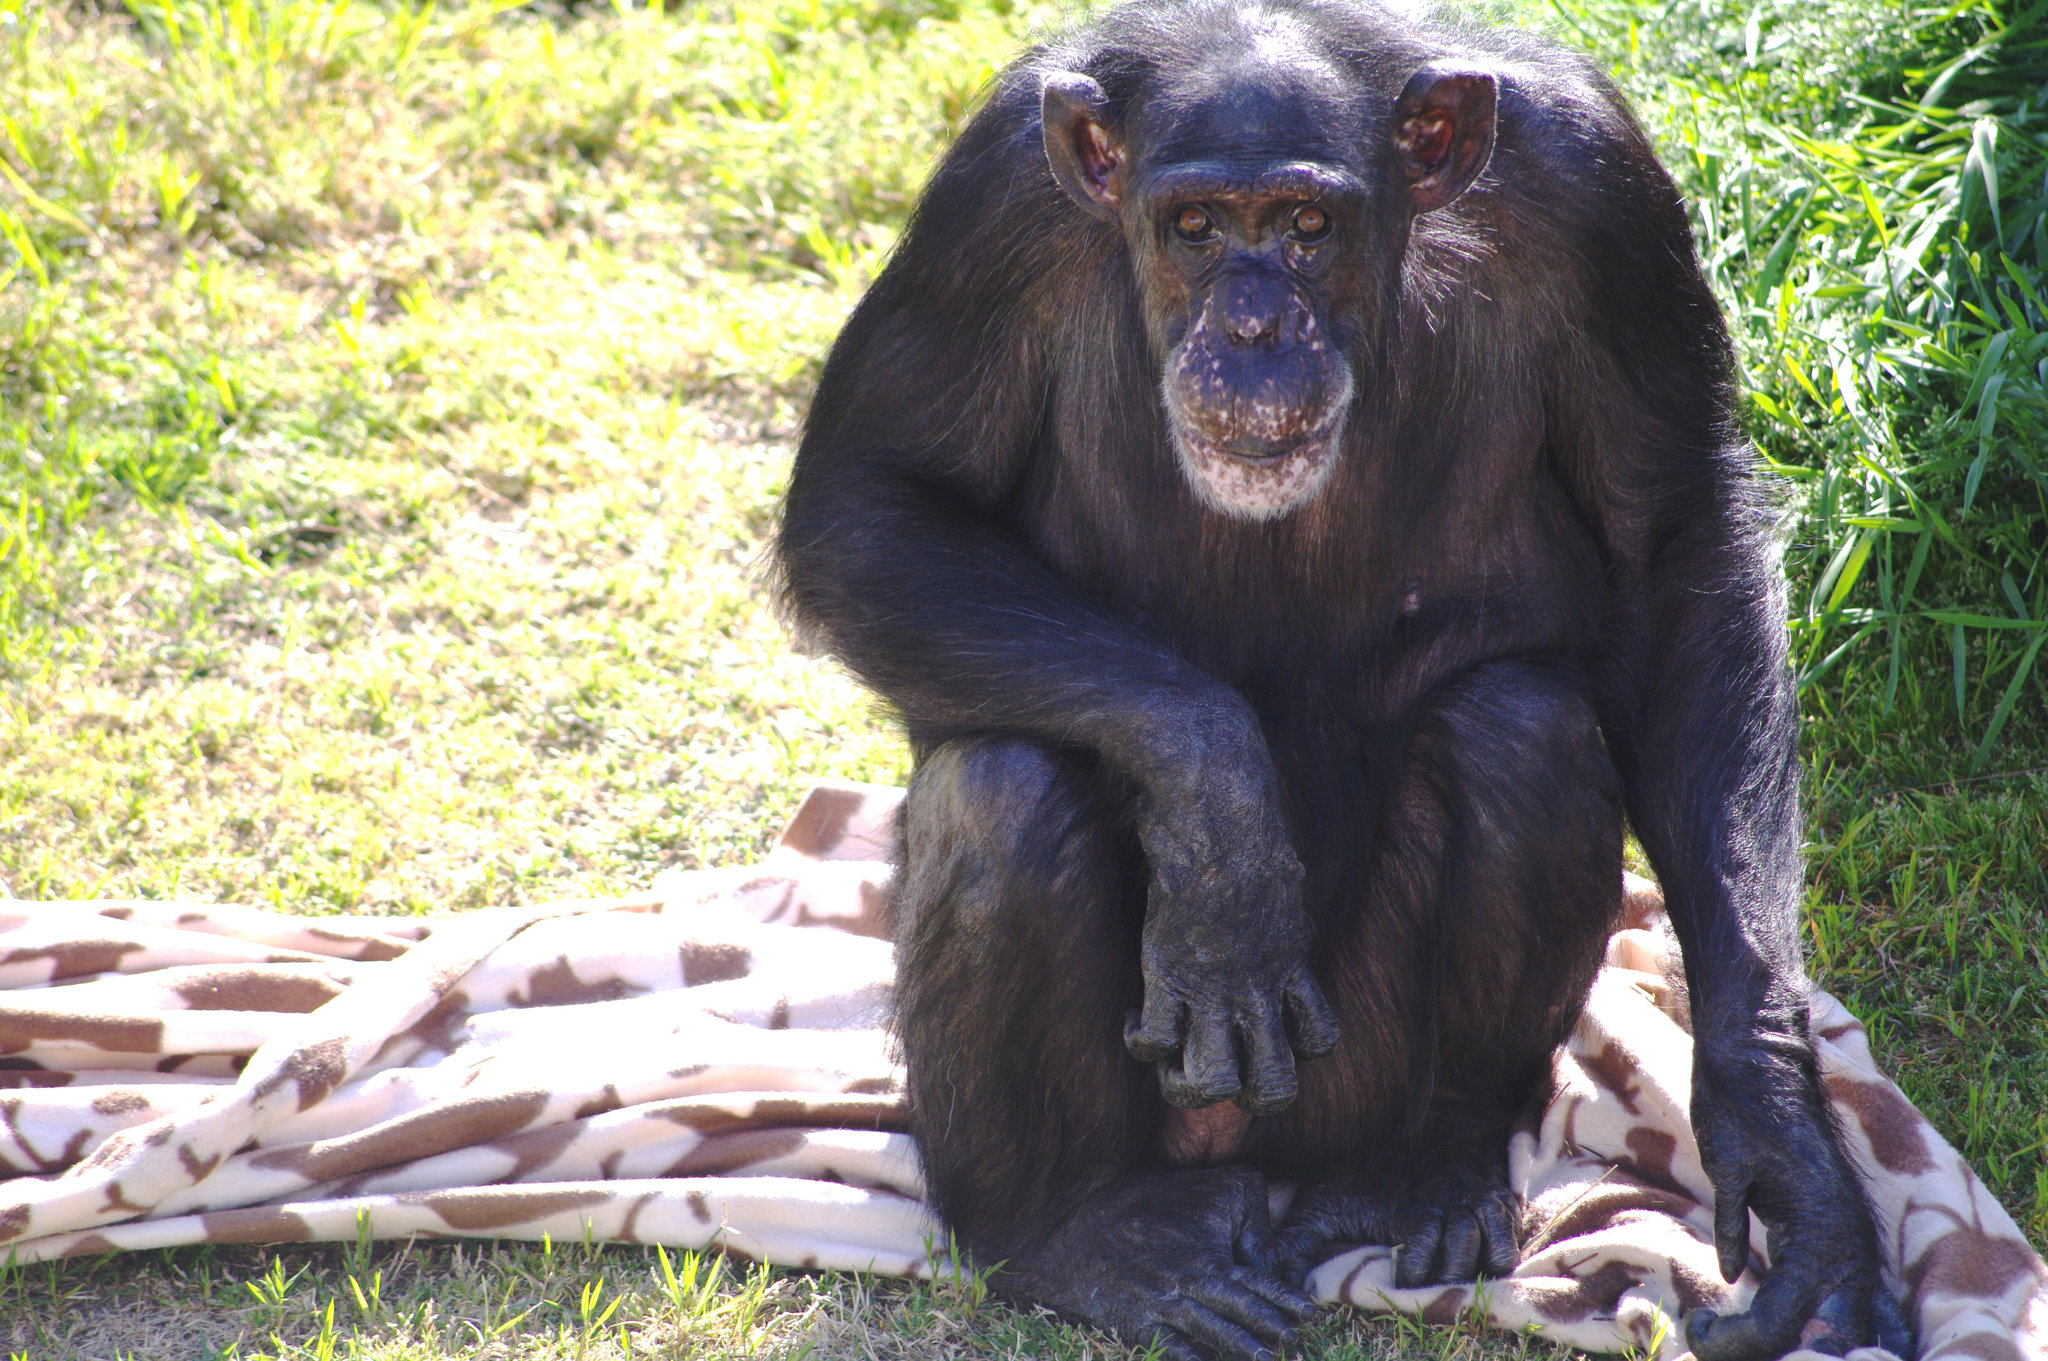 Who is the most smartest chimpanzee?